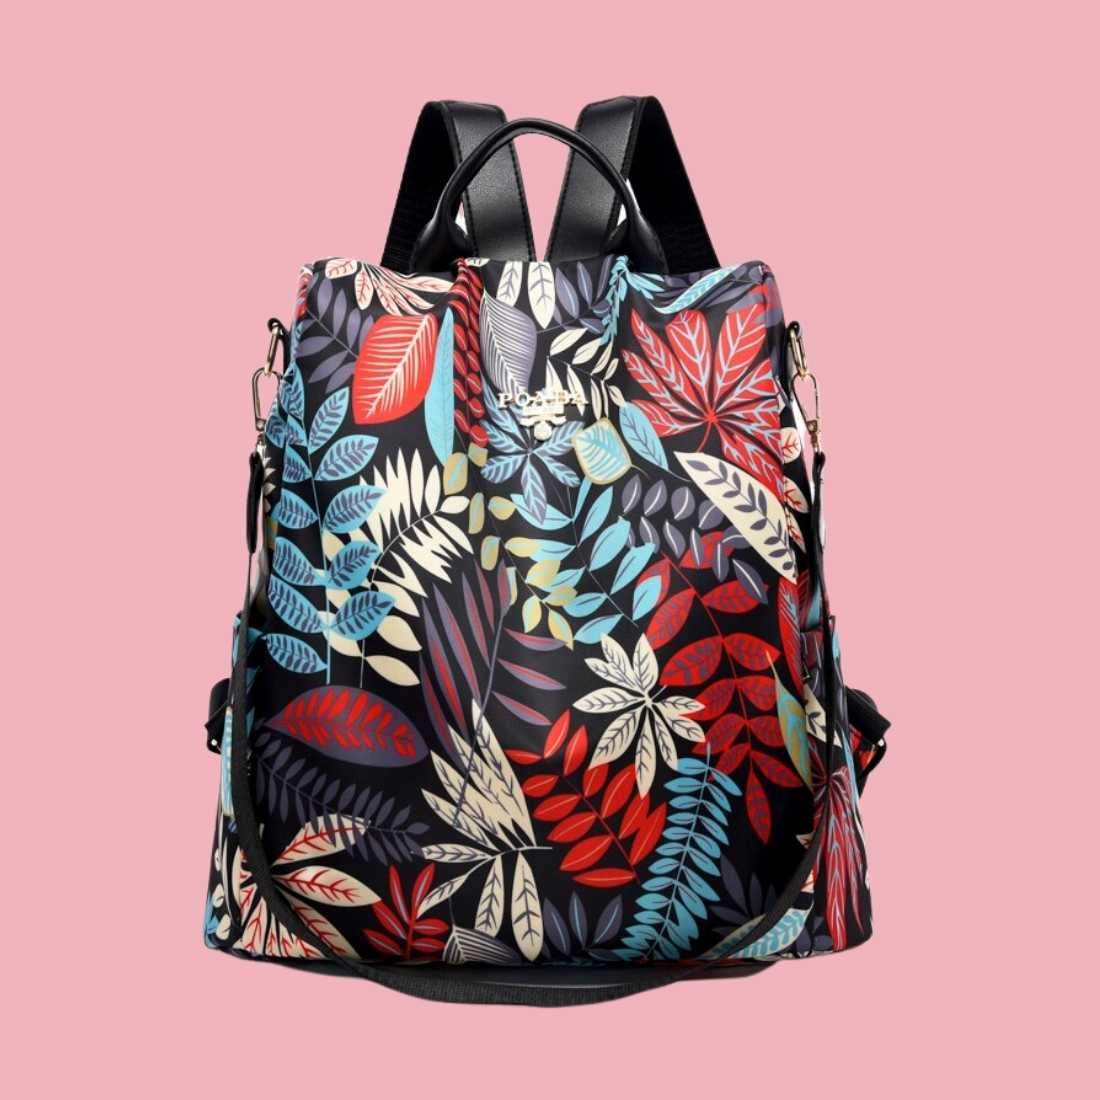 NEW Fashion Backpack for Girls - Pink & Blue Baby Shop - Review